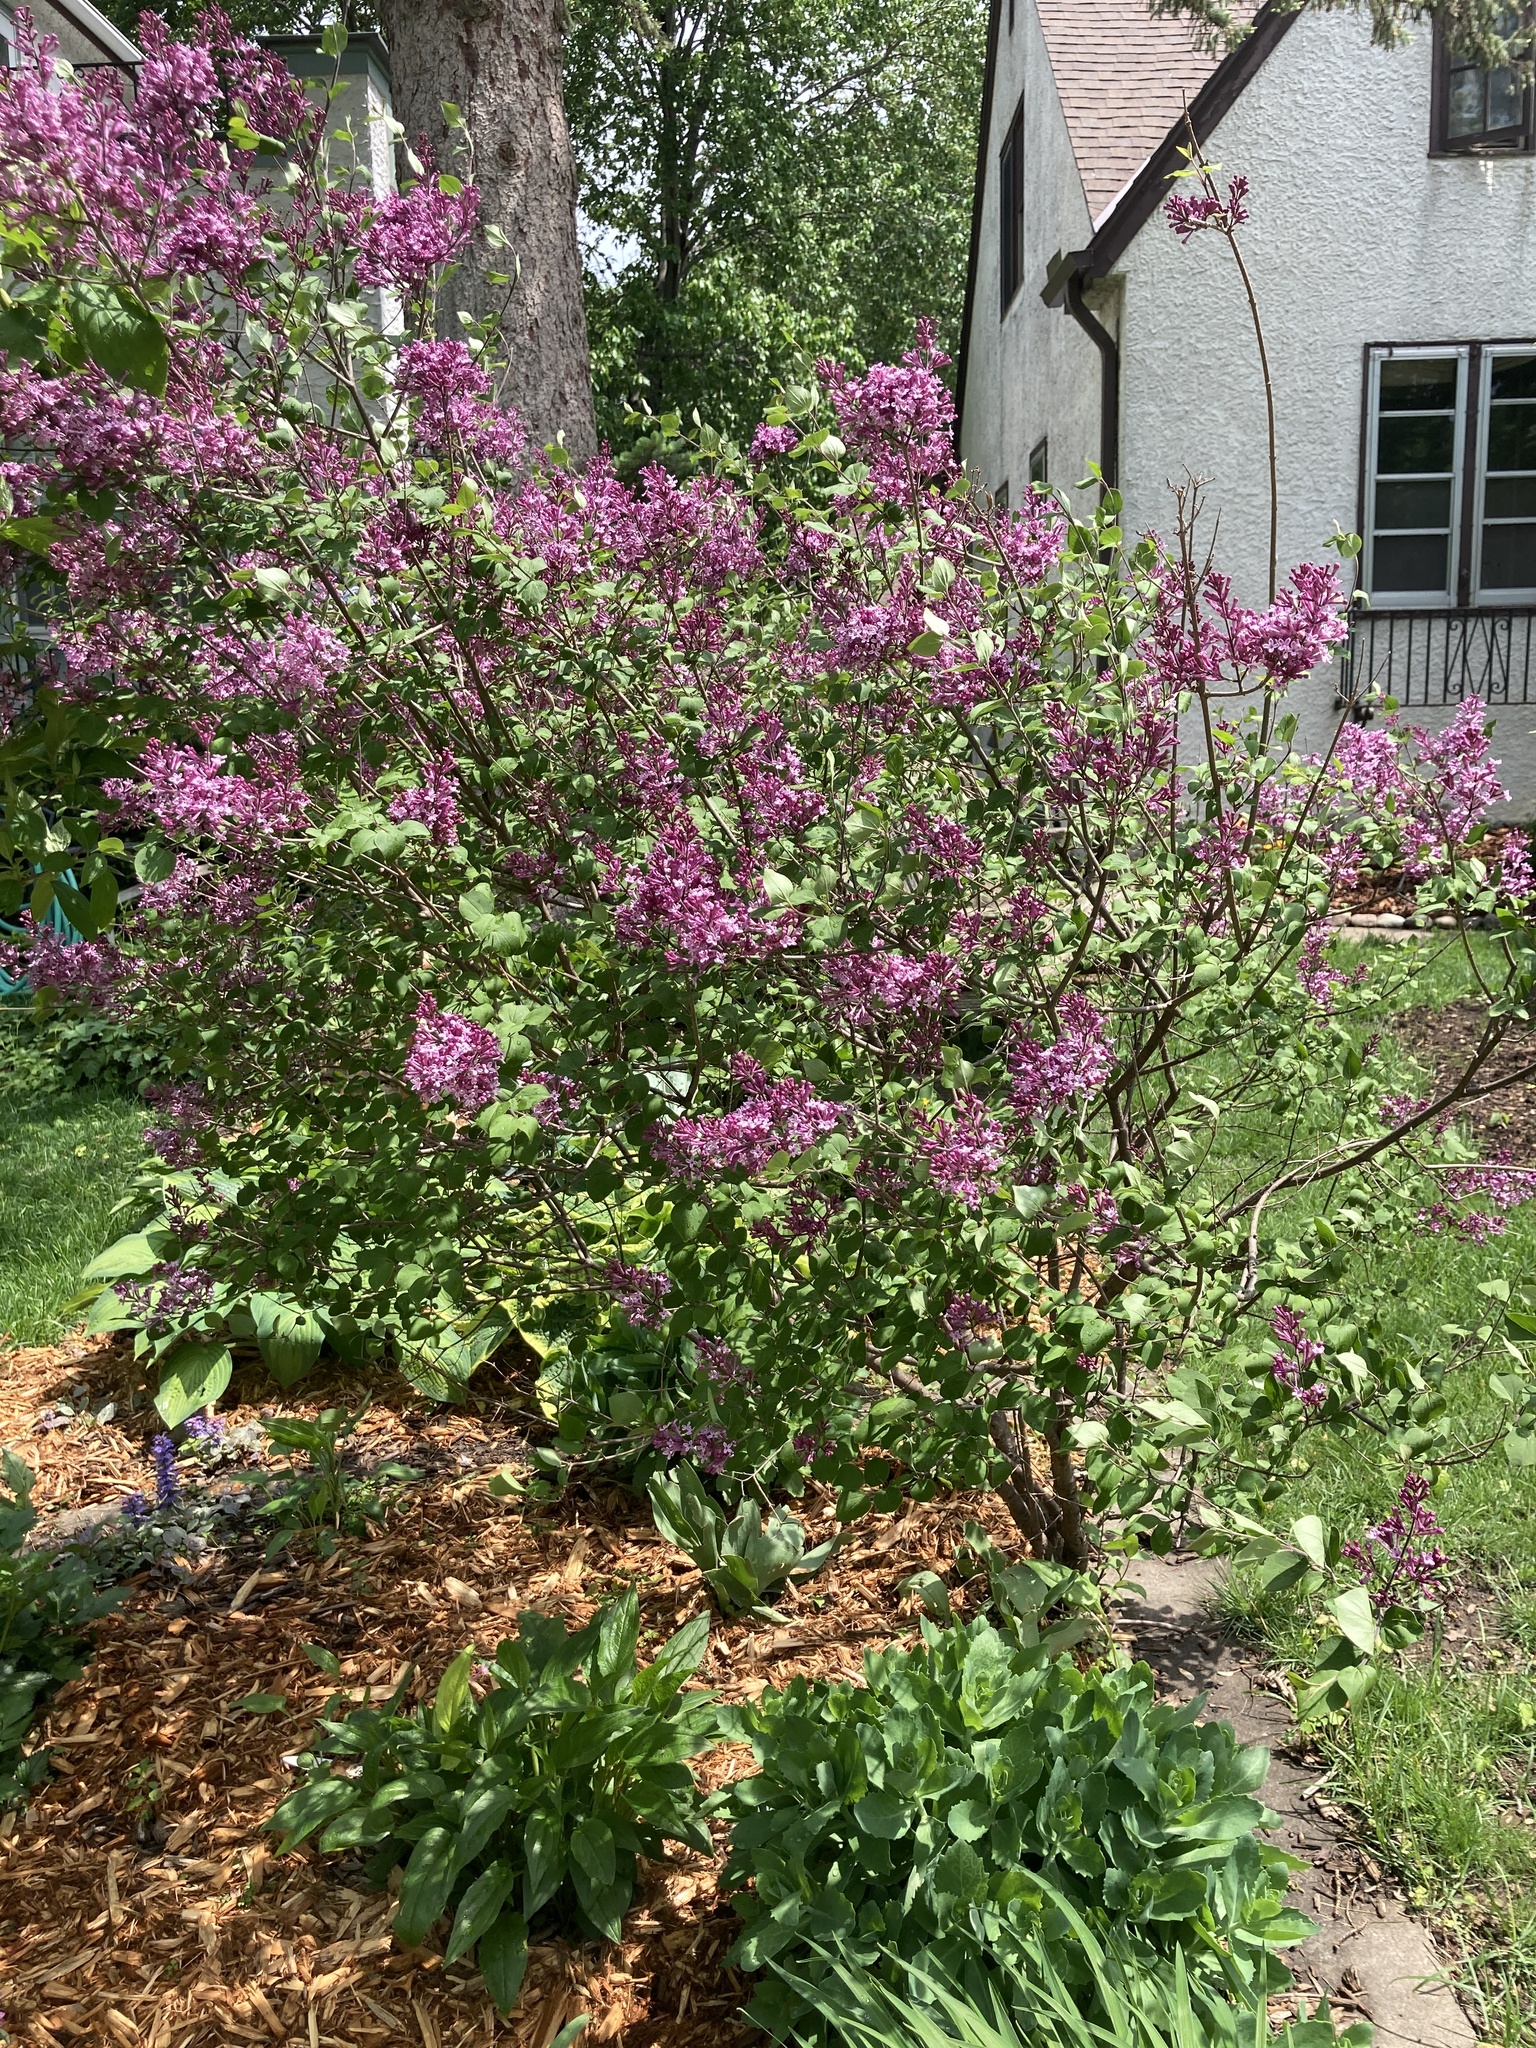 Common lilac with purple flowers in a landscaped setting